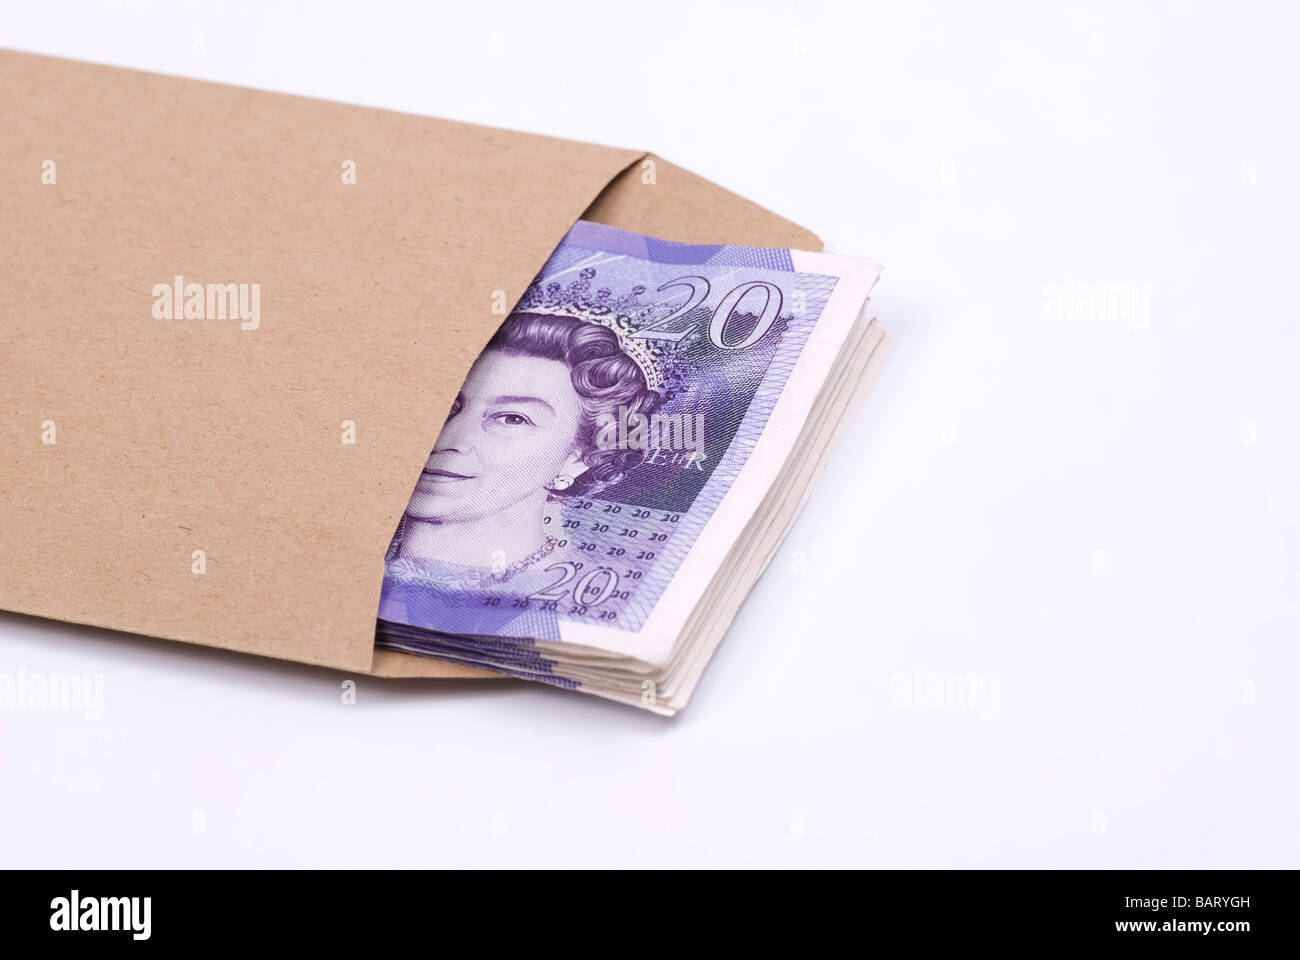 Stack of British money inside a brown envelope against a white background Stock Photo